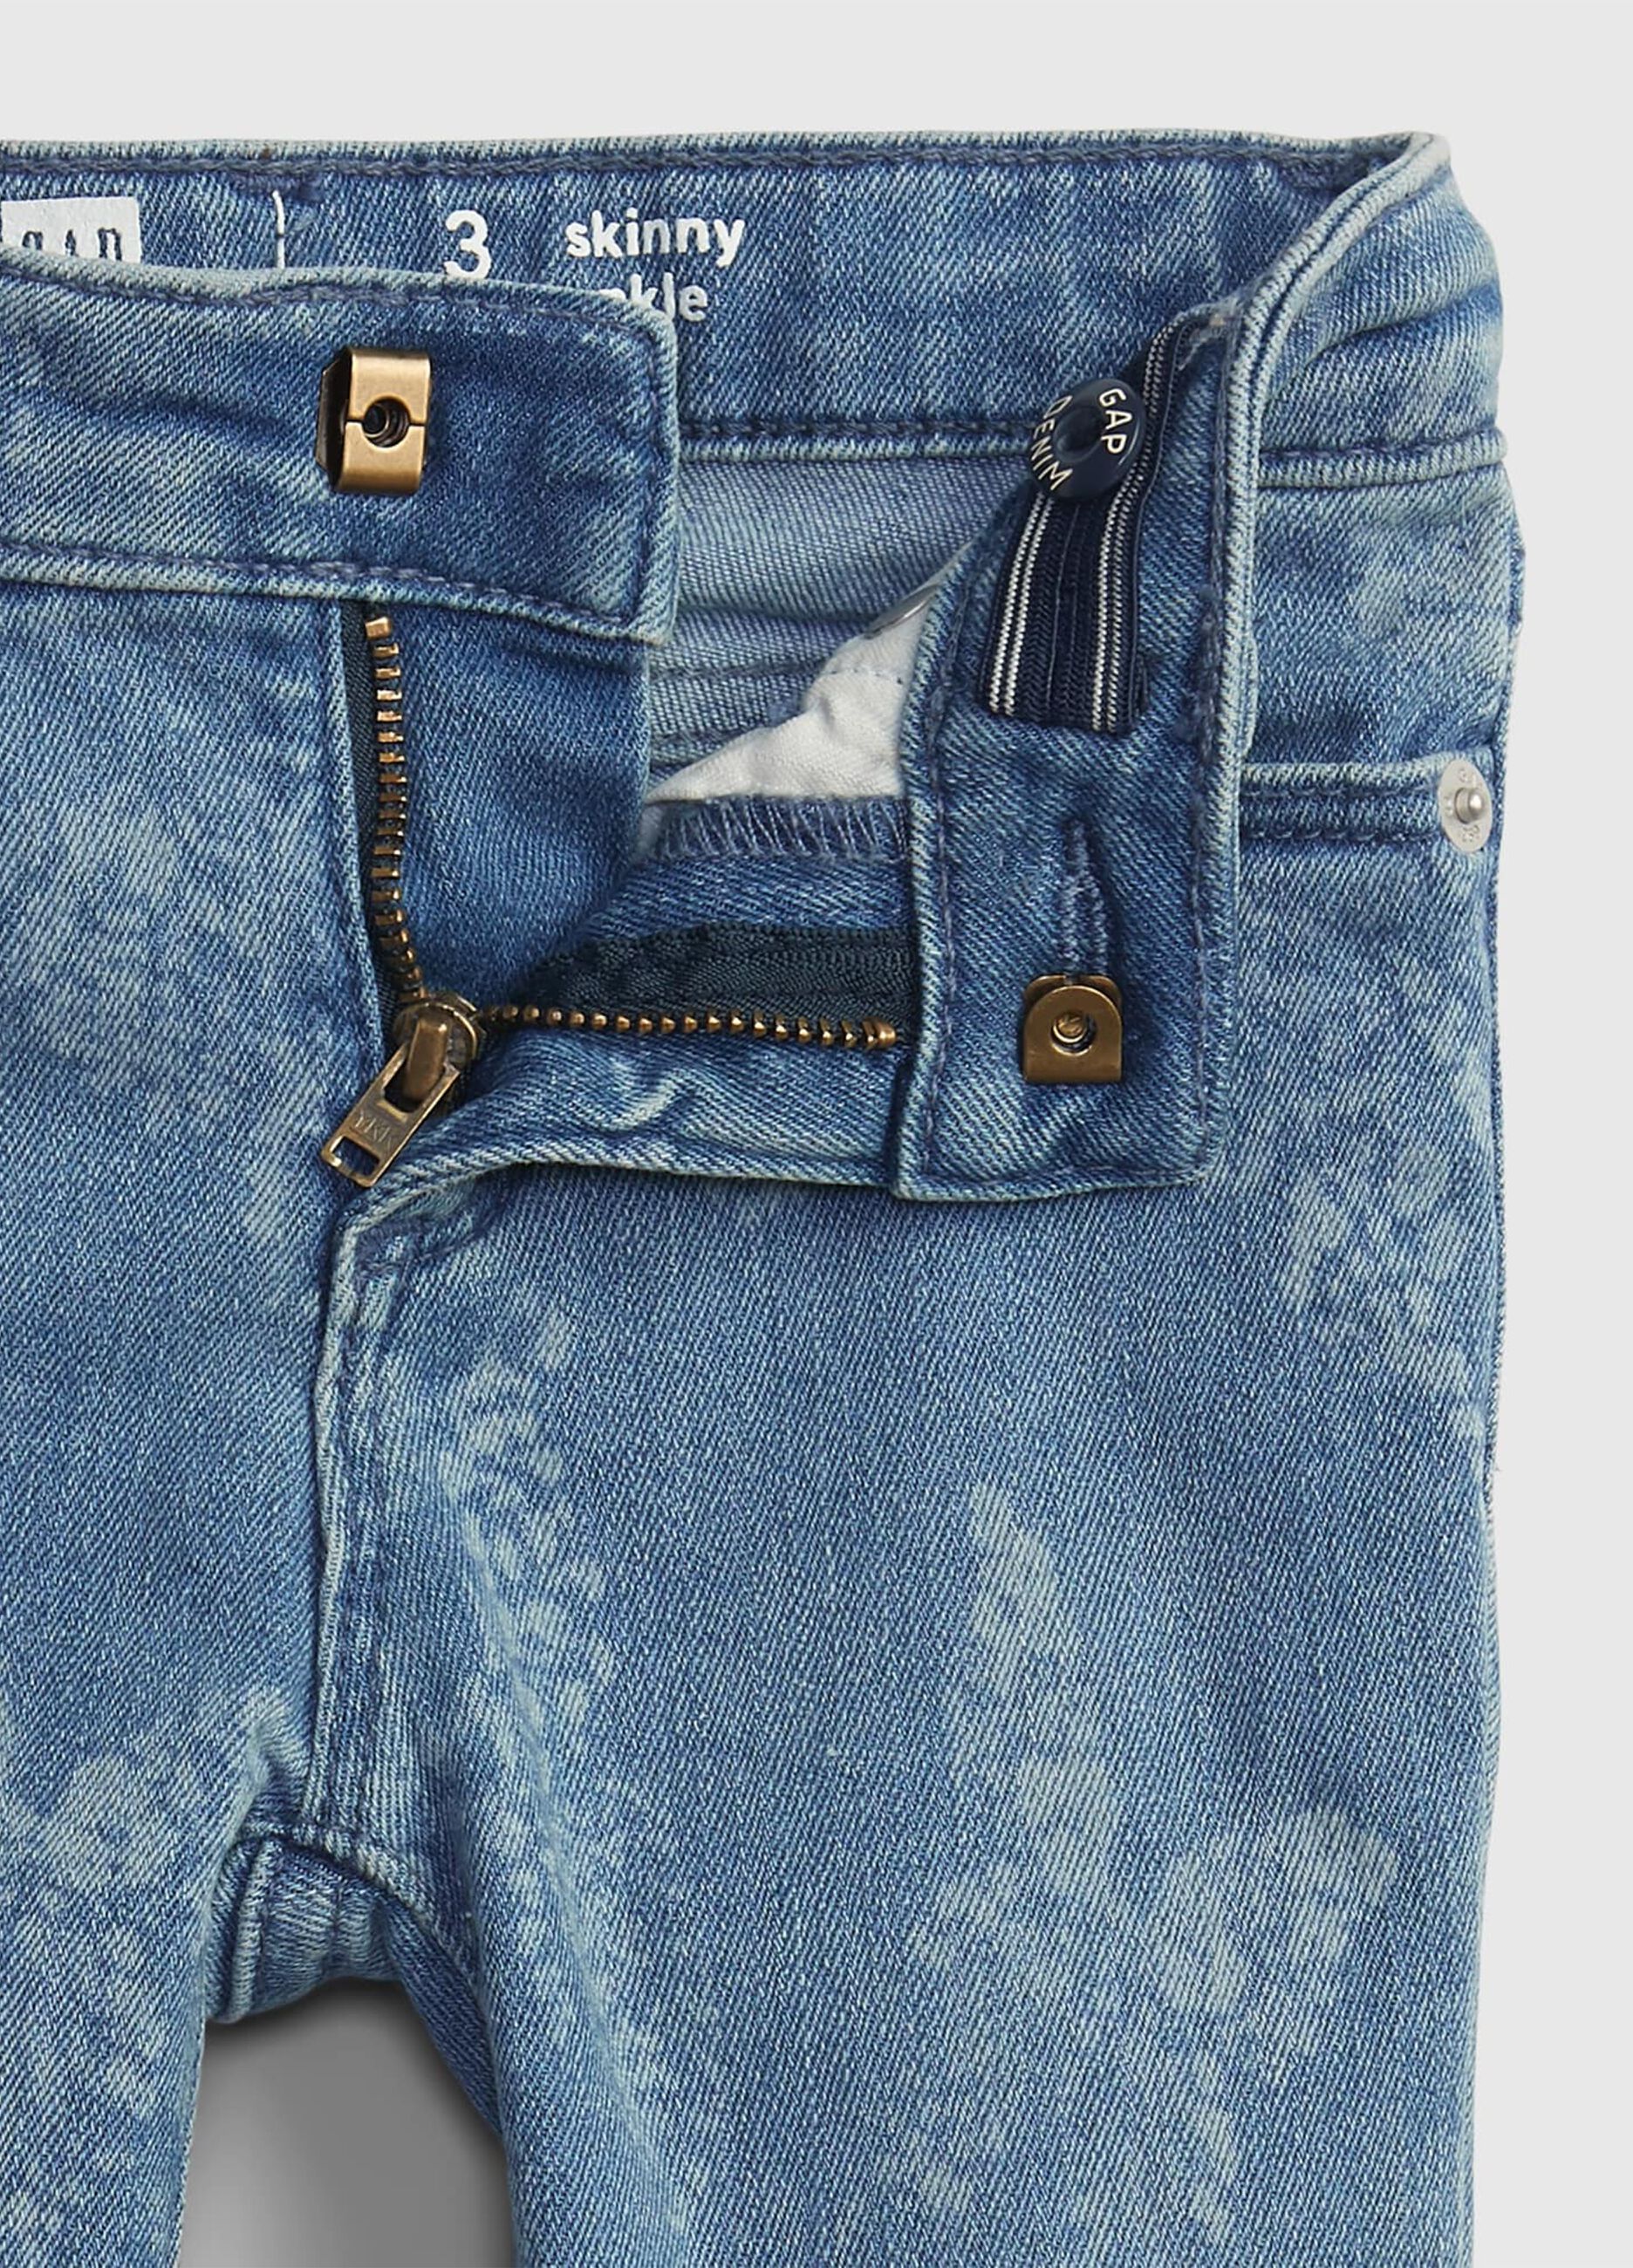 Skinny-fit jeans with butterflies print